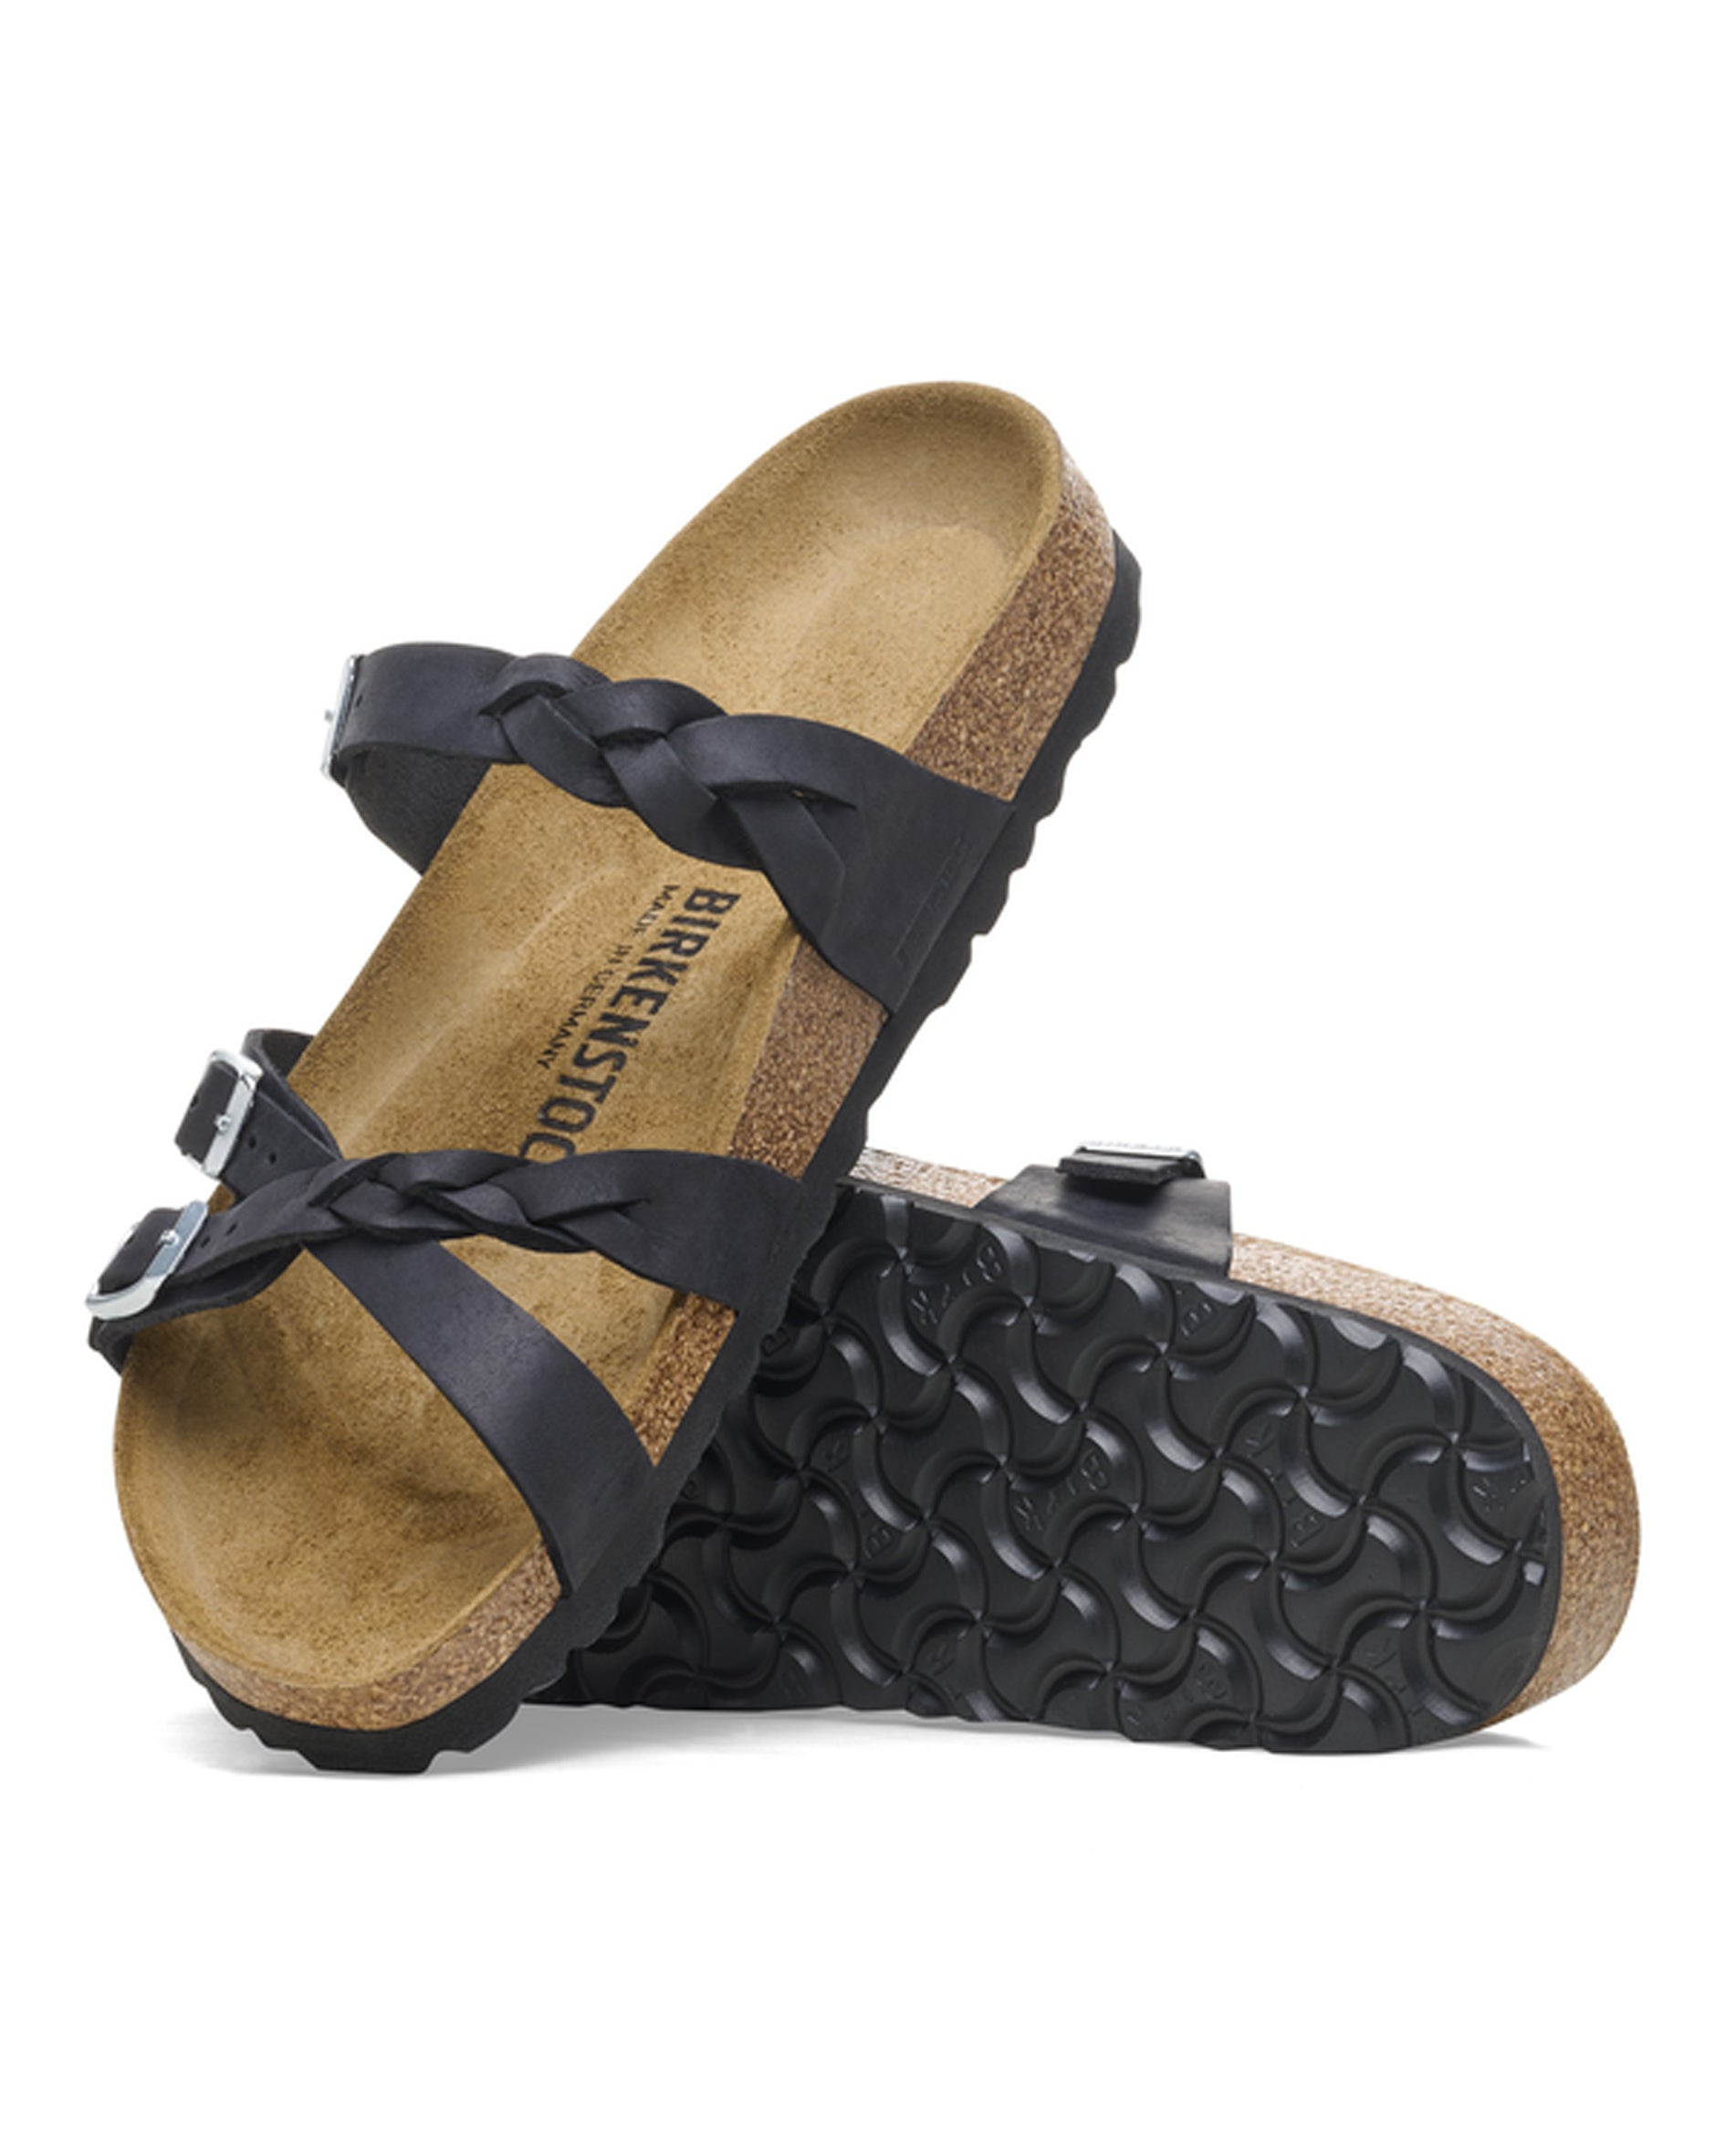 Franca Braided Black Oiled Leather Sandals